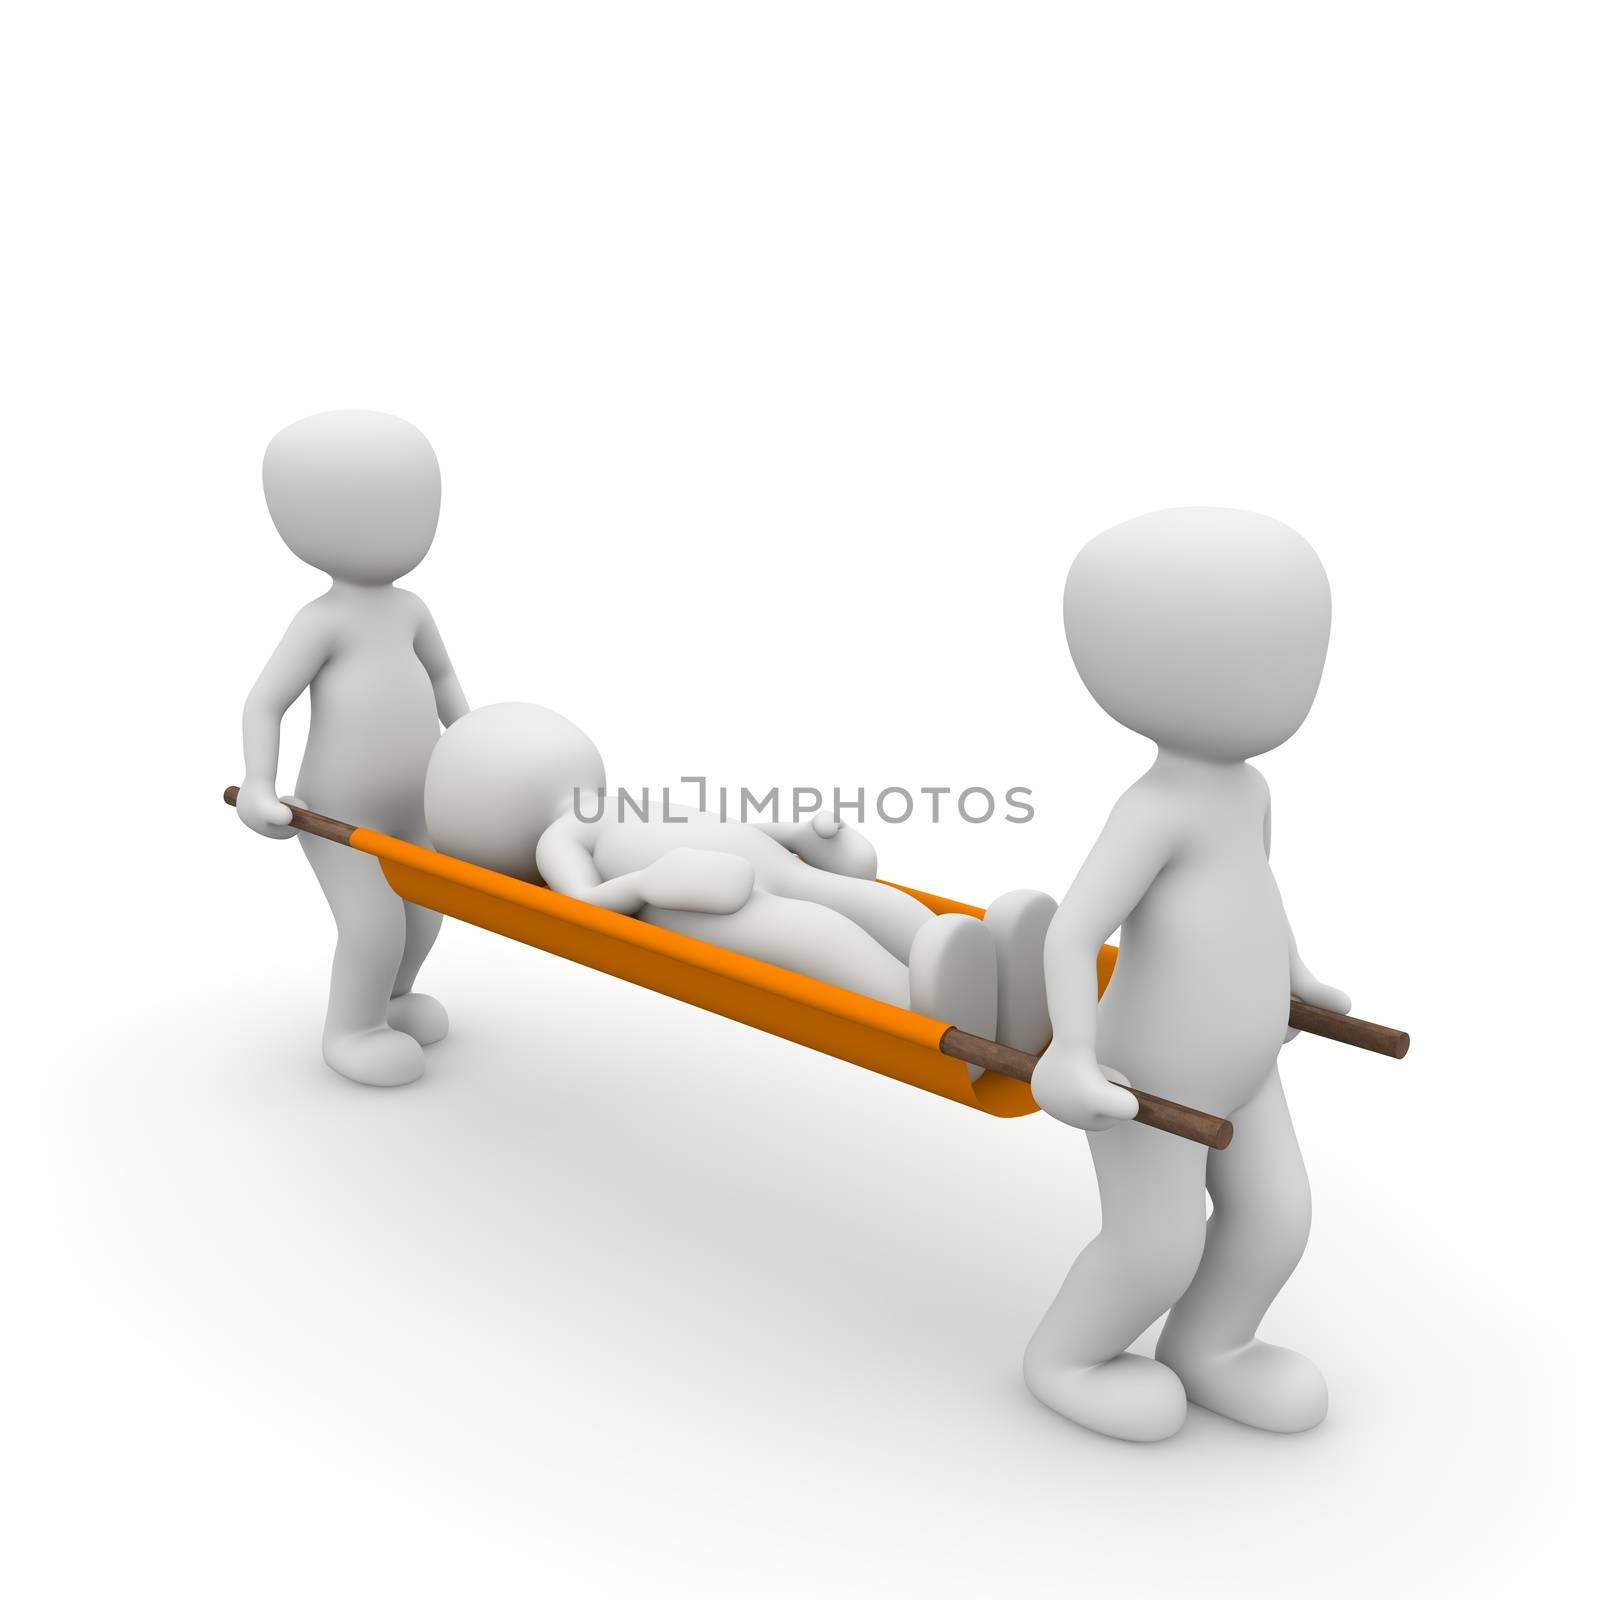 Two character carrying a third on a ambulance stretcher.